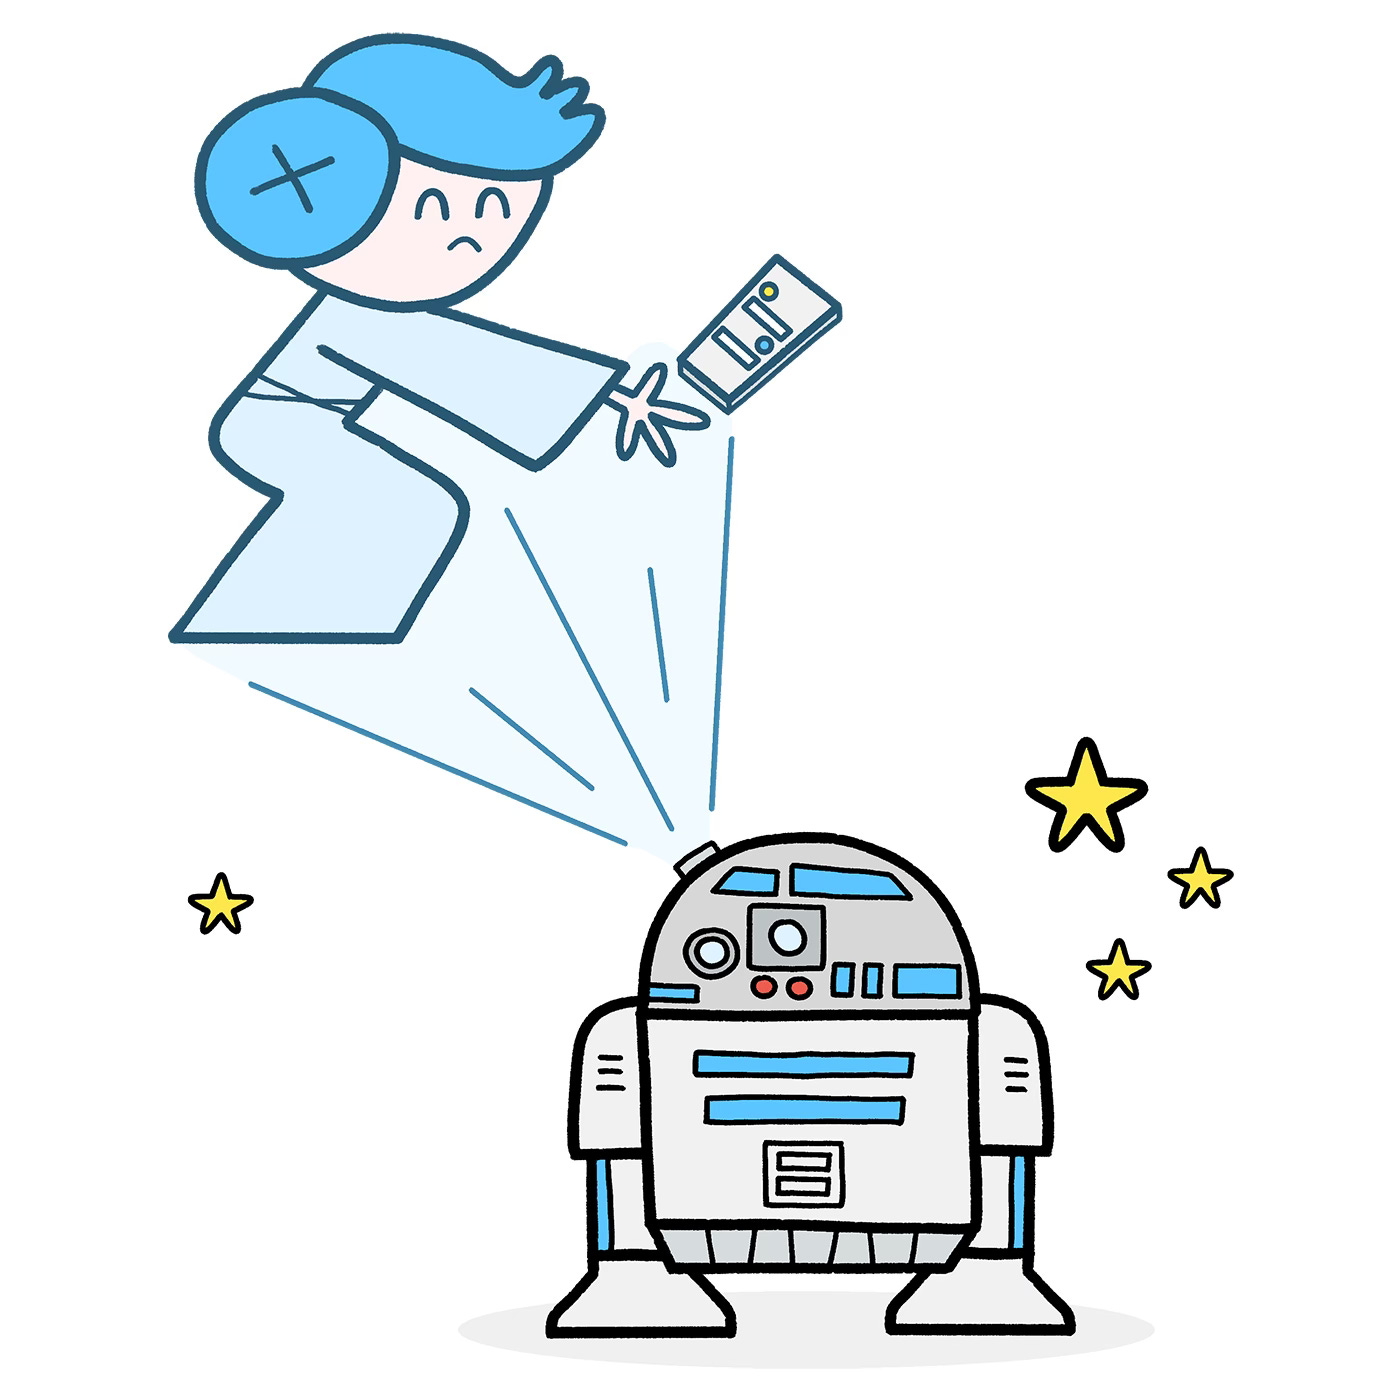 An illustration of R2-D2 and Princess Leia fro Star Wars.